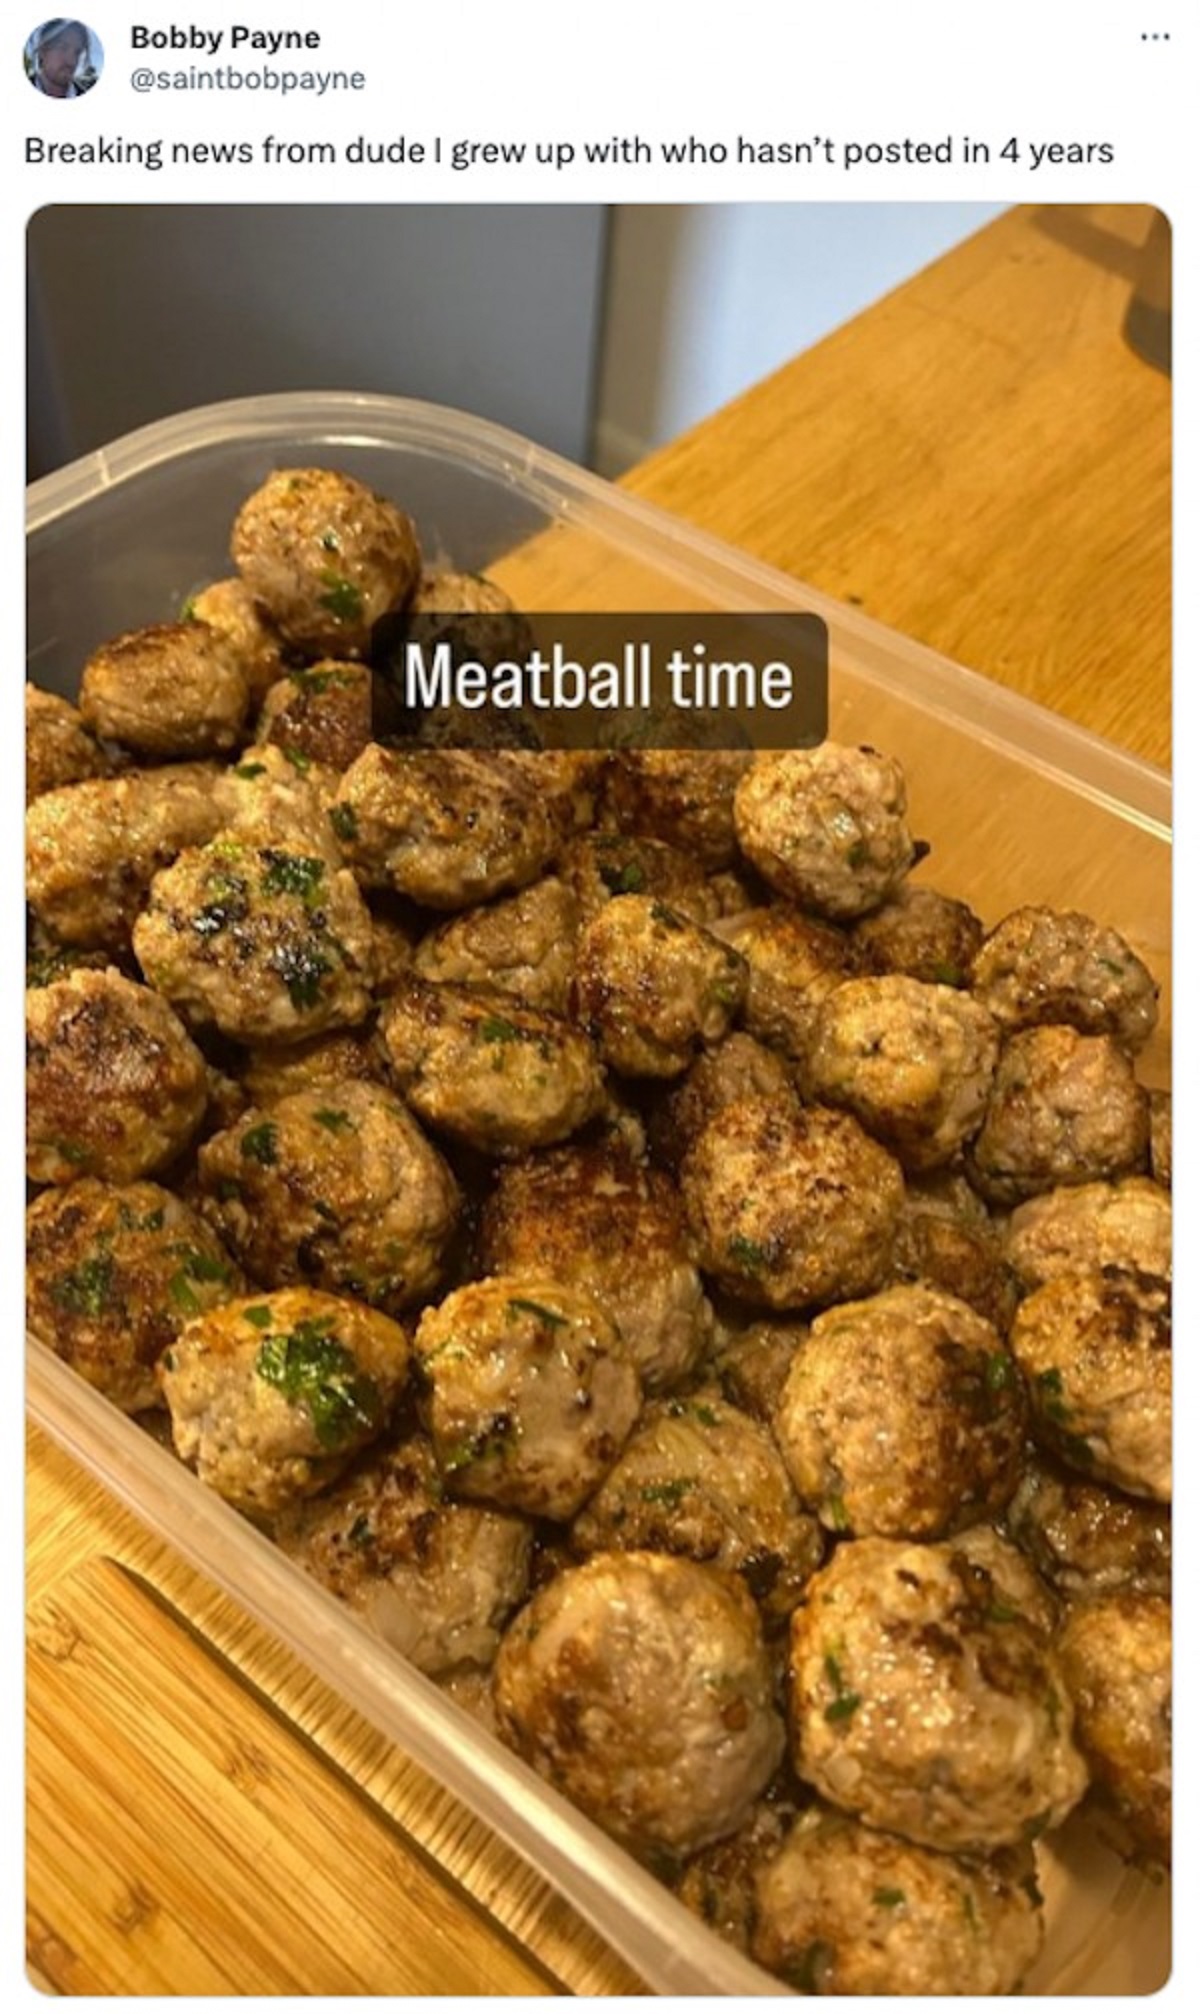 meatball - Bobby Payne Breaking news from dude I grew up with who hasn't posted in 4 years Meatball time www